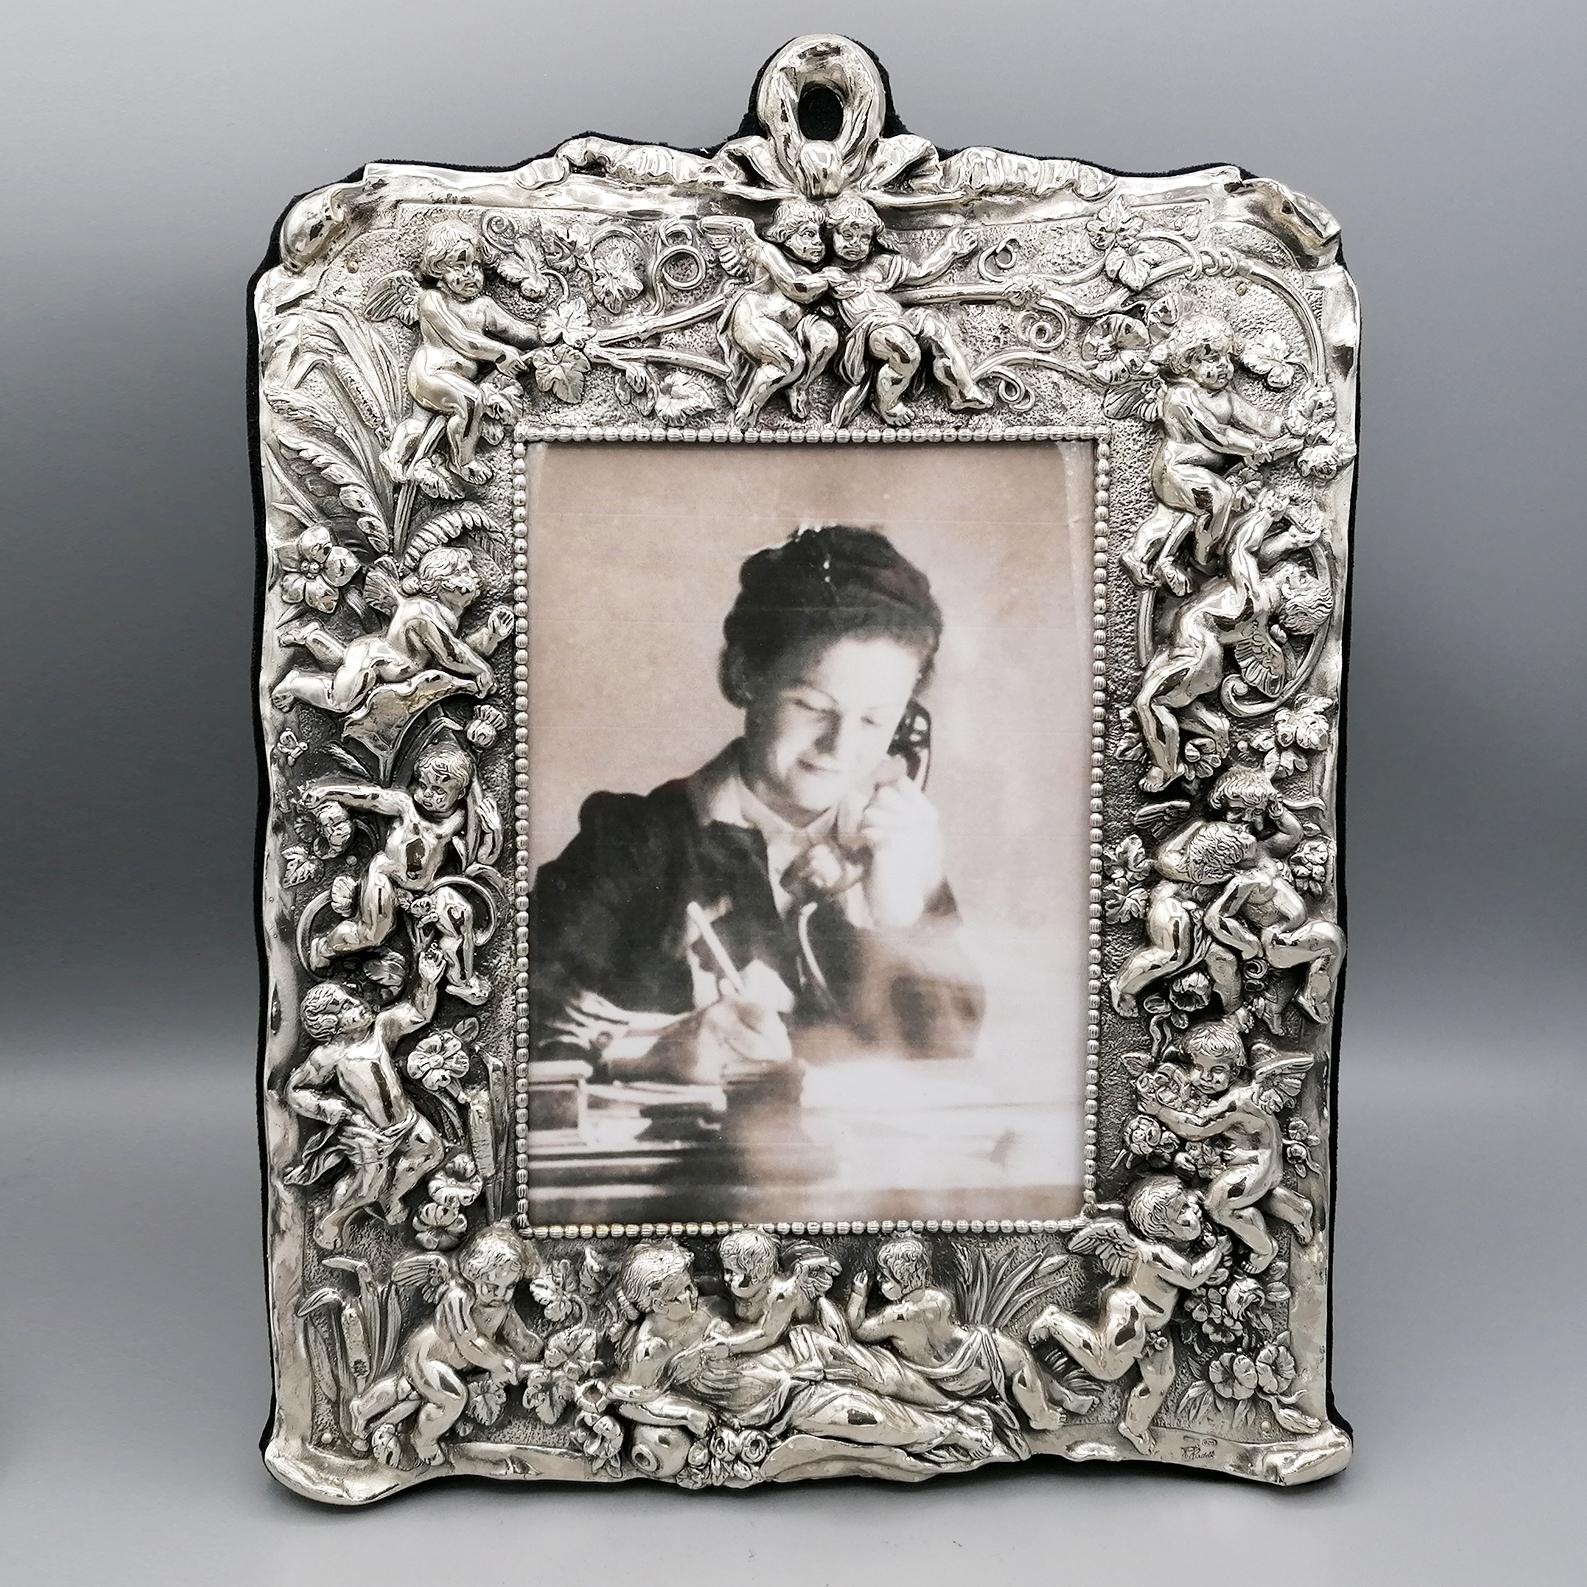 Sterling silver frame depicting scenes with cherubs and angels.
The workmanship is in lost wax and finished with chisel. 
Then subsequently burnished and antiqued
The measure of the photograph is 13x18 cm
Italian silverware, already with a